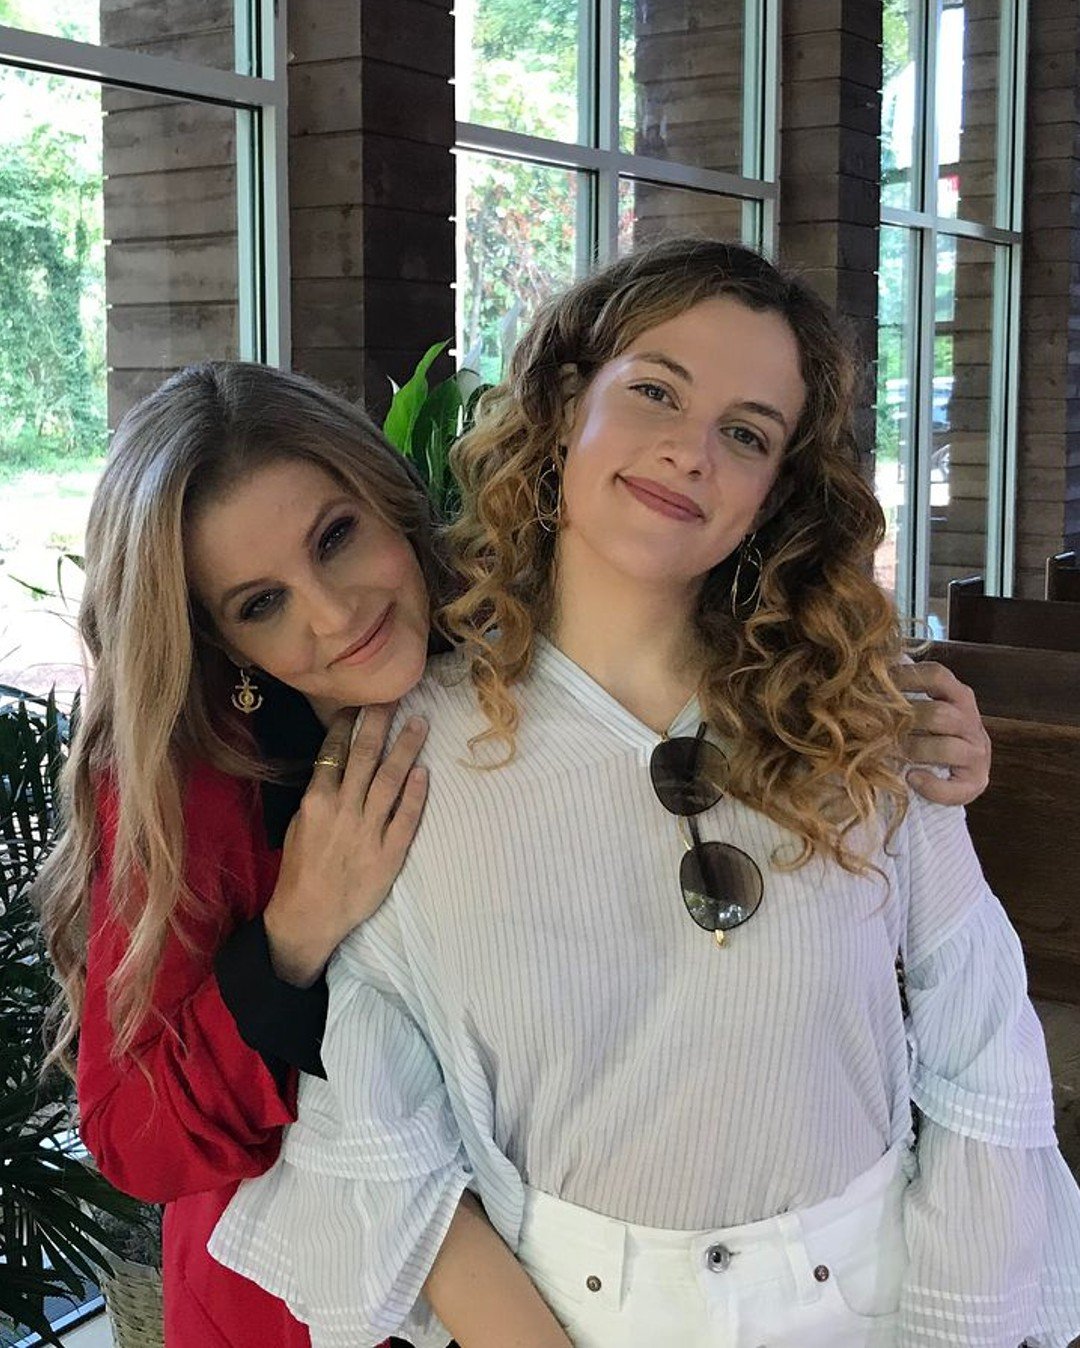 Lisa Presley e Riley Keough - casual - série - inverno - Street style - https://stealthelook.com.br